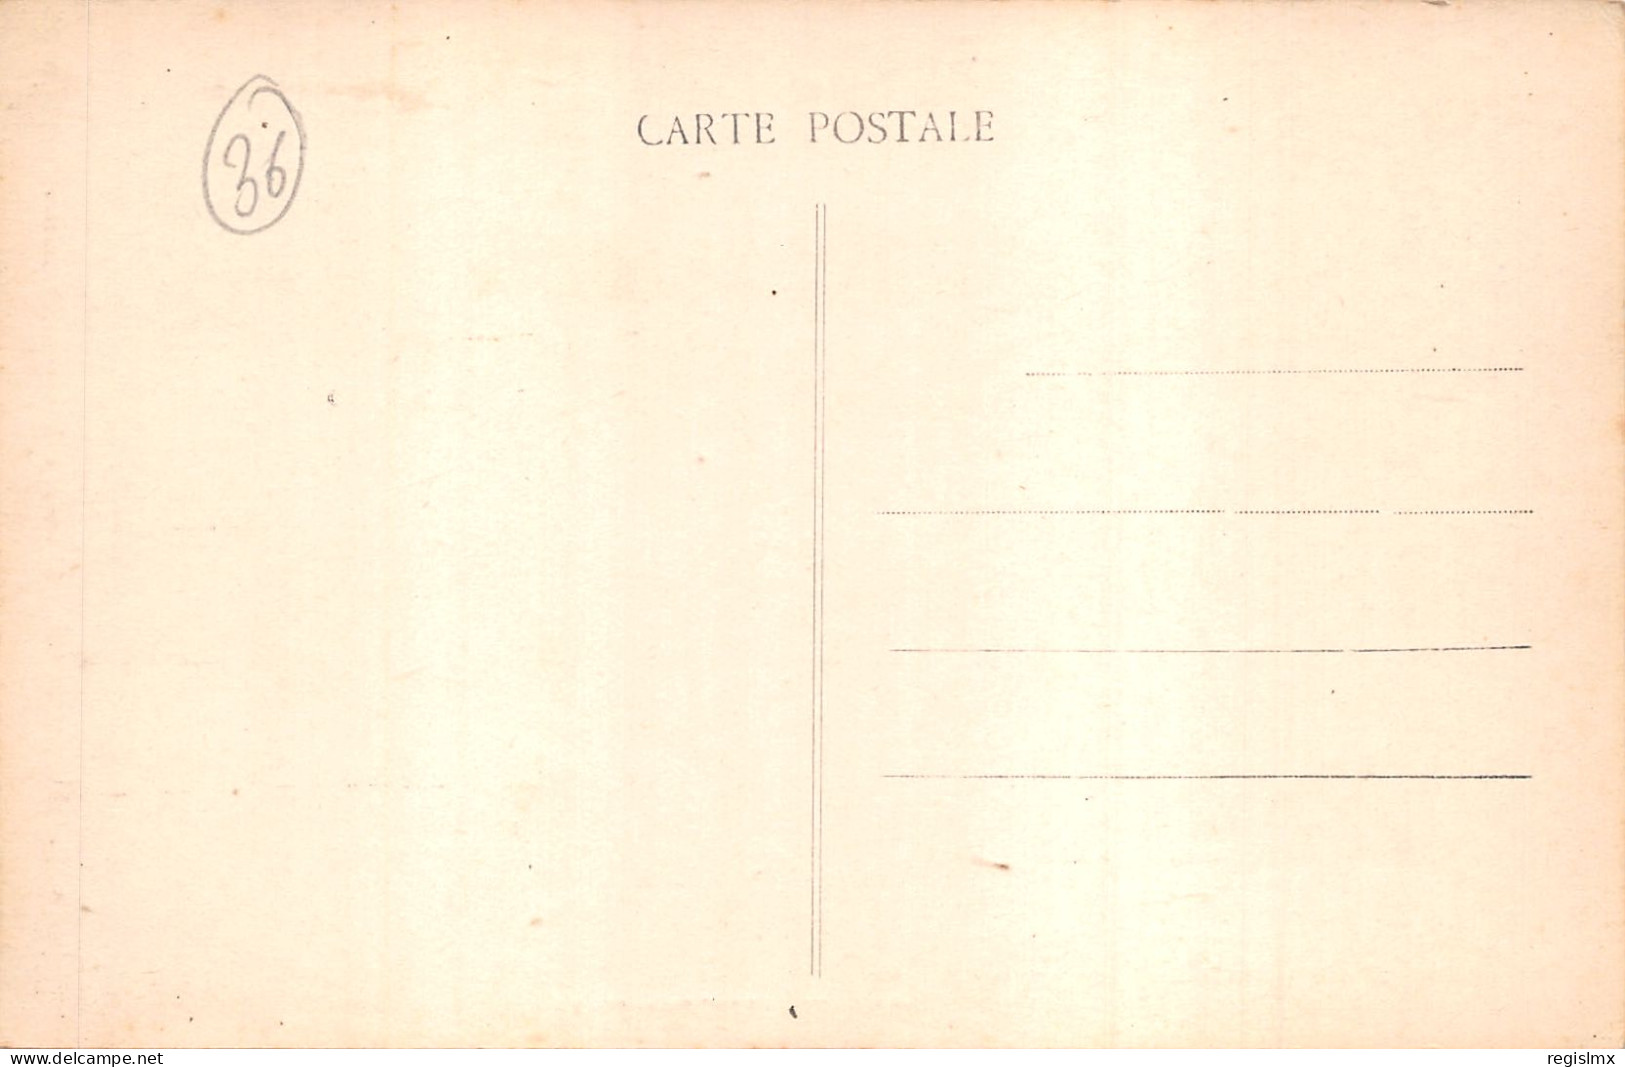 36-CHATEAUROUX-N°2162-B/0133 - Chateauroux